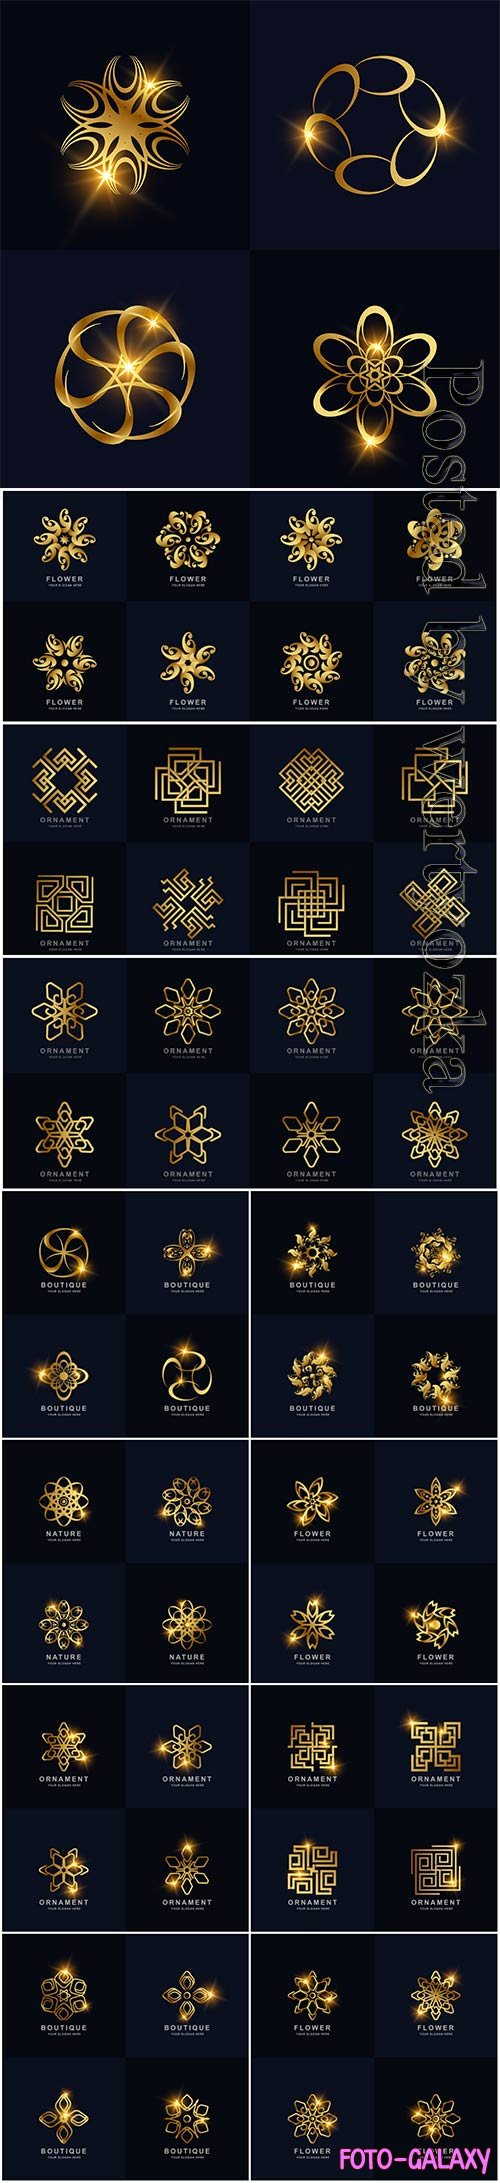 Abstract golden flower ornament logo set collection